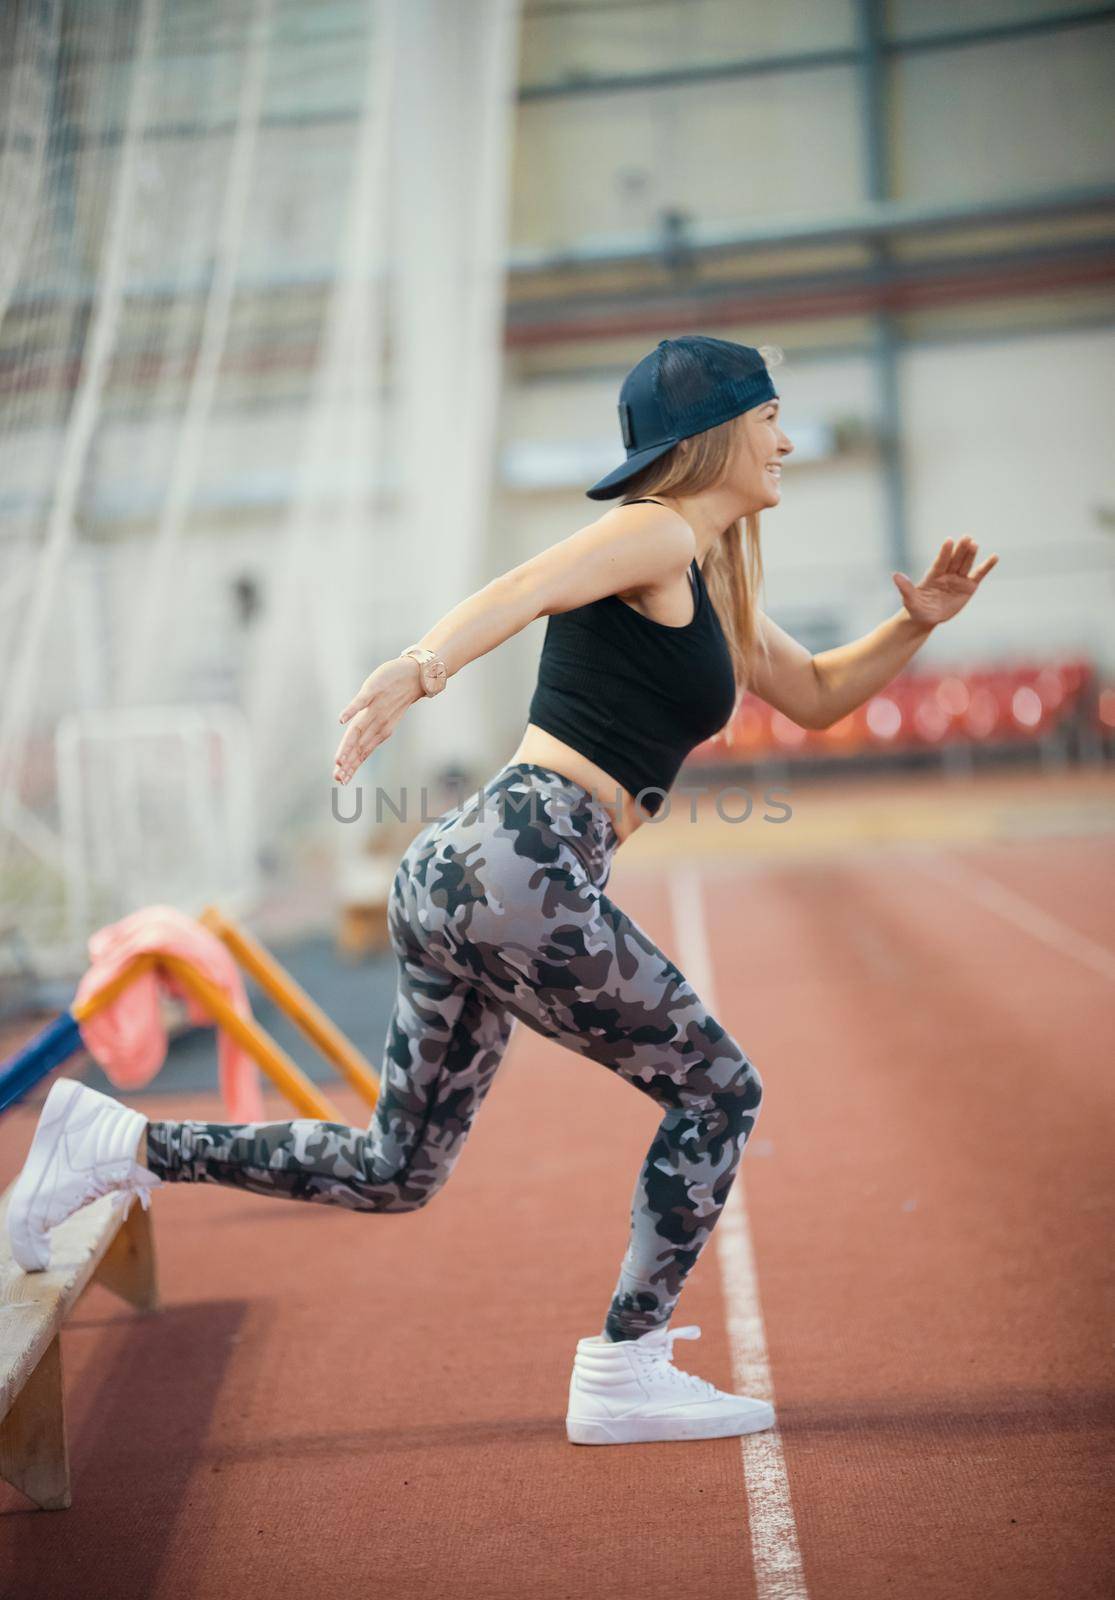 Young athletic woman in leggings working out using a bench. Mid shot